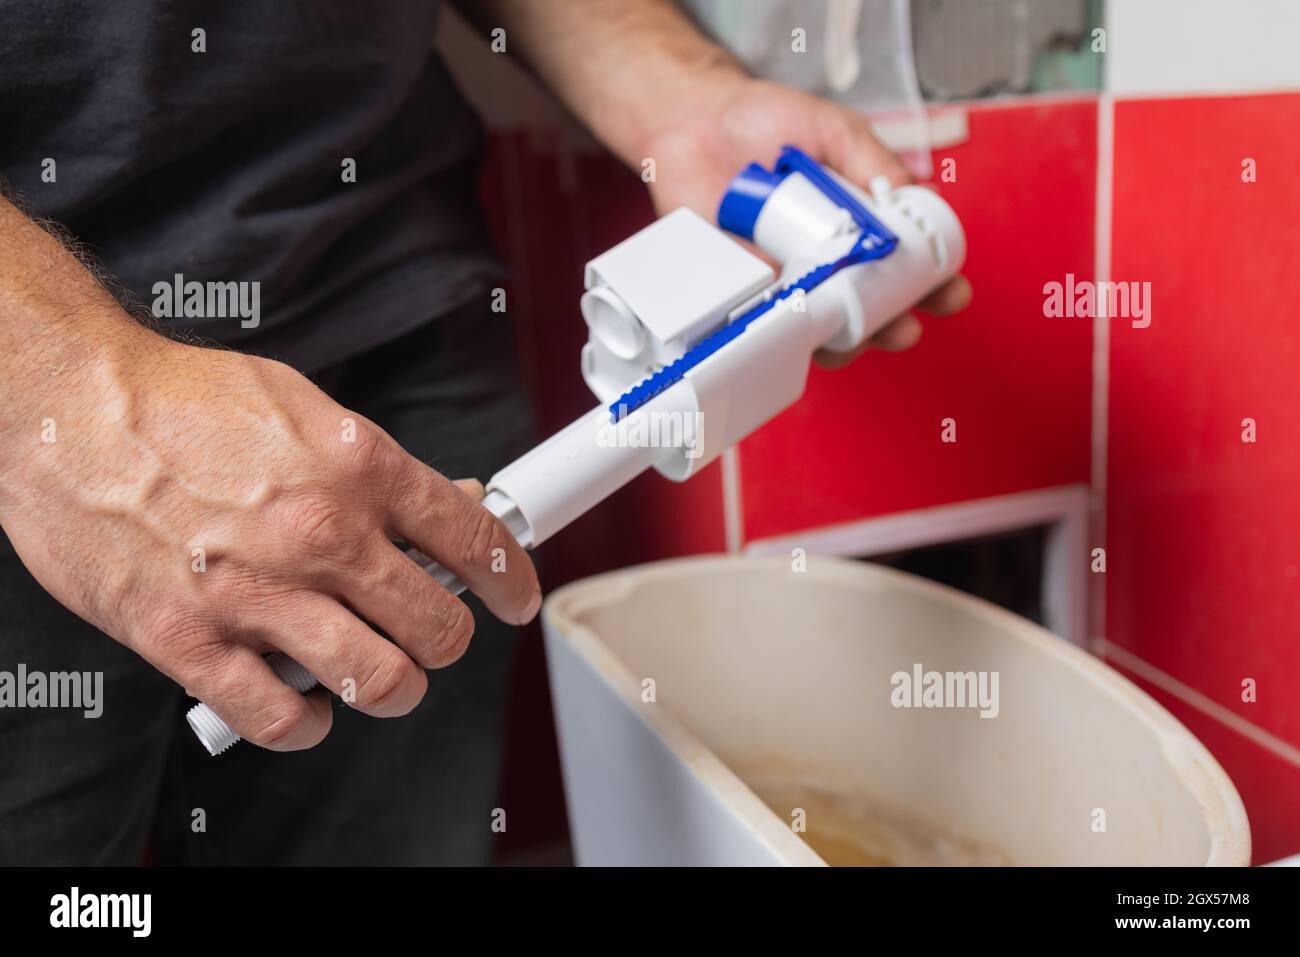 Toilet tank parts replacement. A man in orange gloves repairs the toilet tank drain Stock Photo